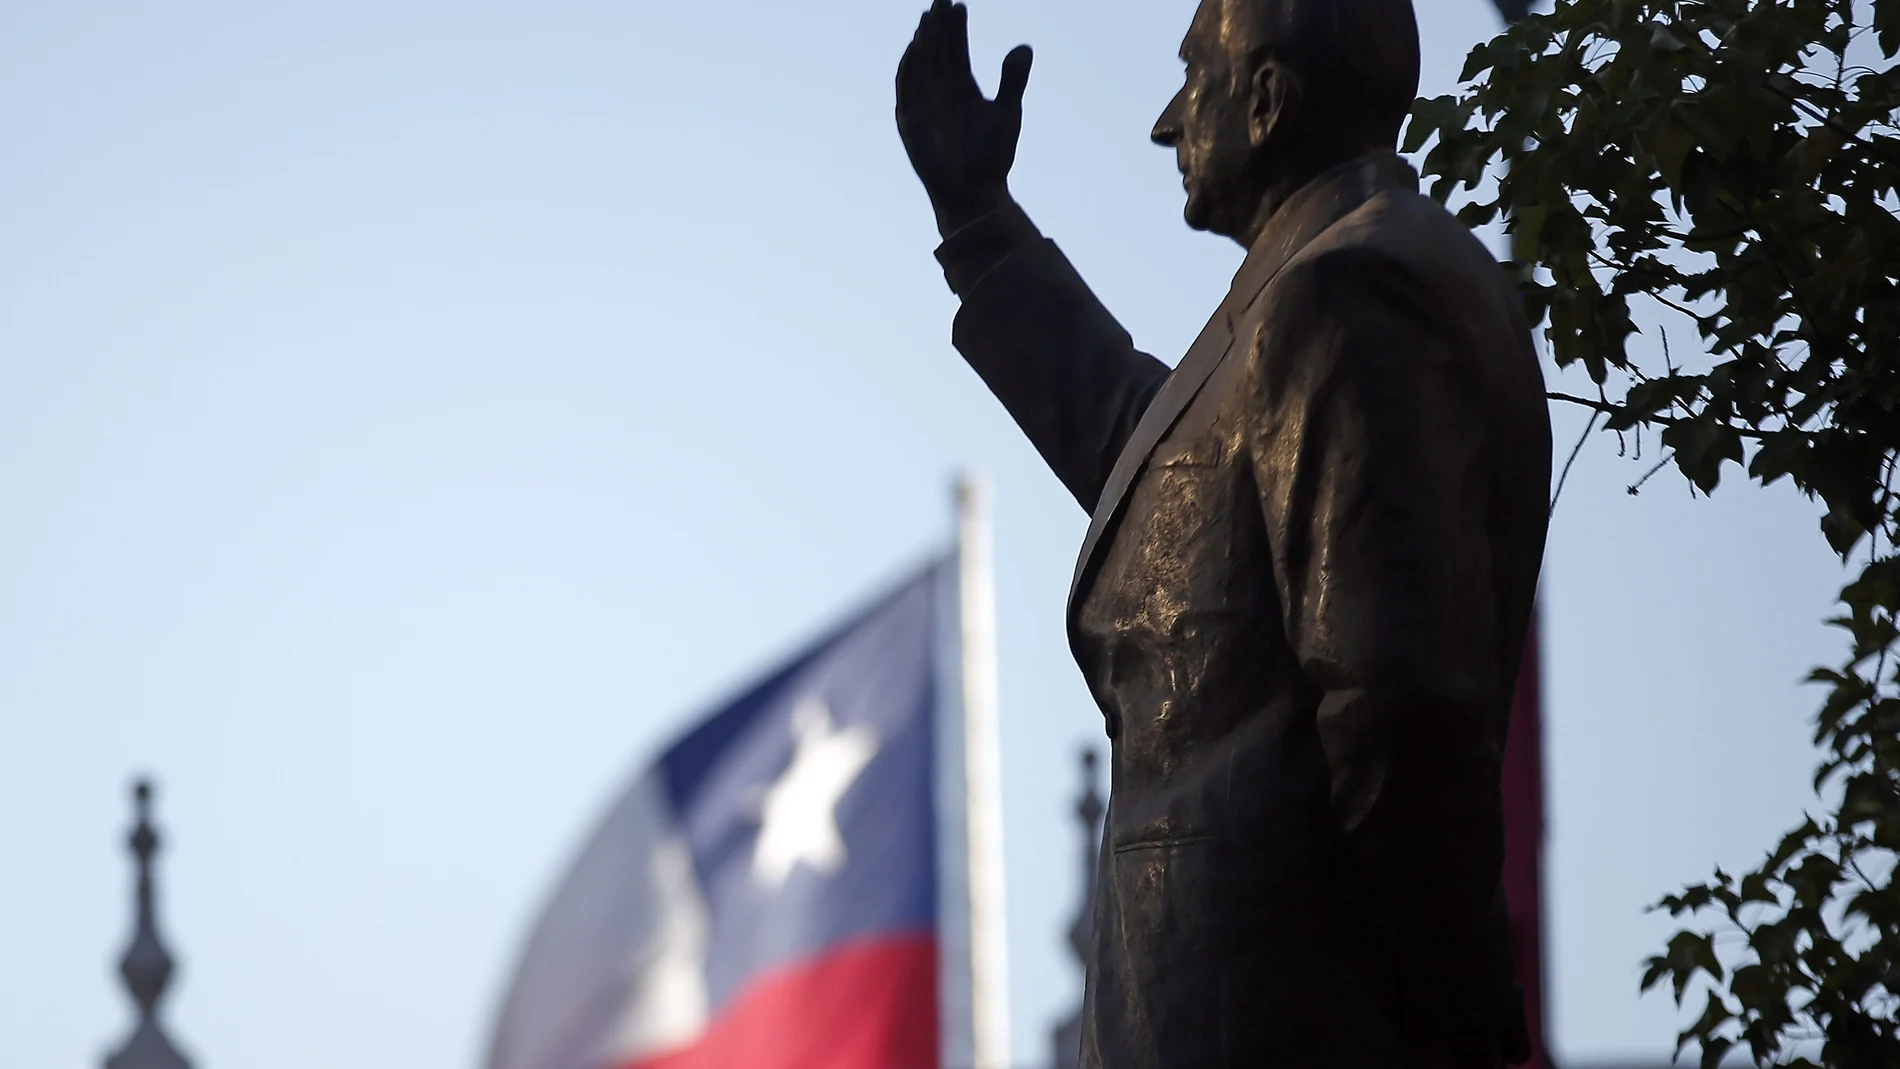 FILE - In this Jan. 30, 2019 file photo, a statue of the late President Eduardo Frei Montalva stands in front of the La Moneda Palace, in Santiago, Chile. A court in Santiago has revoked on Monday, Jan. 25, 2021, a ruling that found 4 doctors and two former security agents of the regime of dictator Augusto Pinochet guilty for the murder of former president Frei in 1982. (AP Photo/Luis Hidalgo, File)